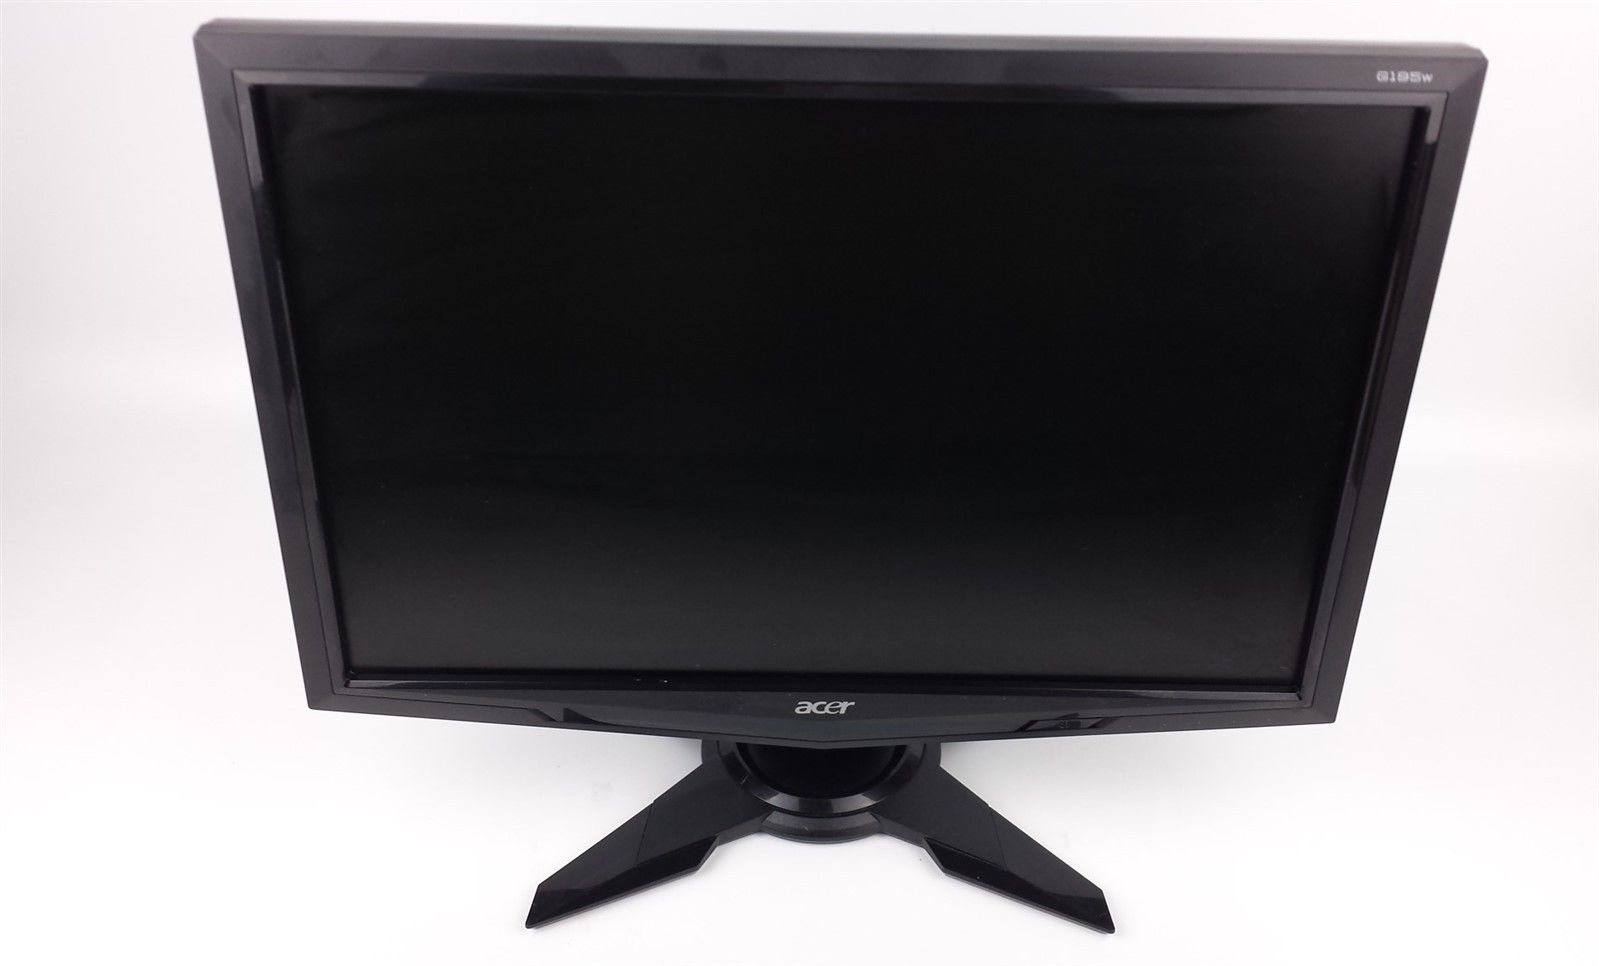 Acer Display G195W LCD Computer Monitor 19" with Power and VGA Cord